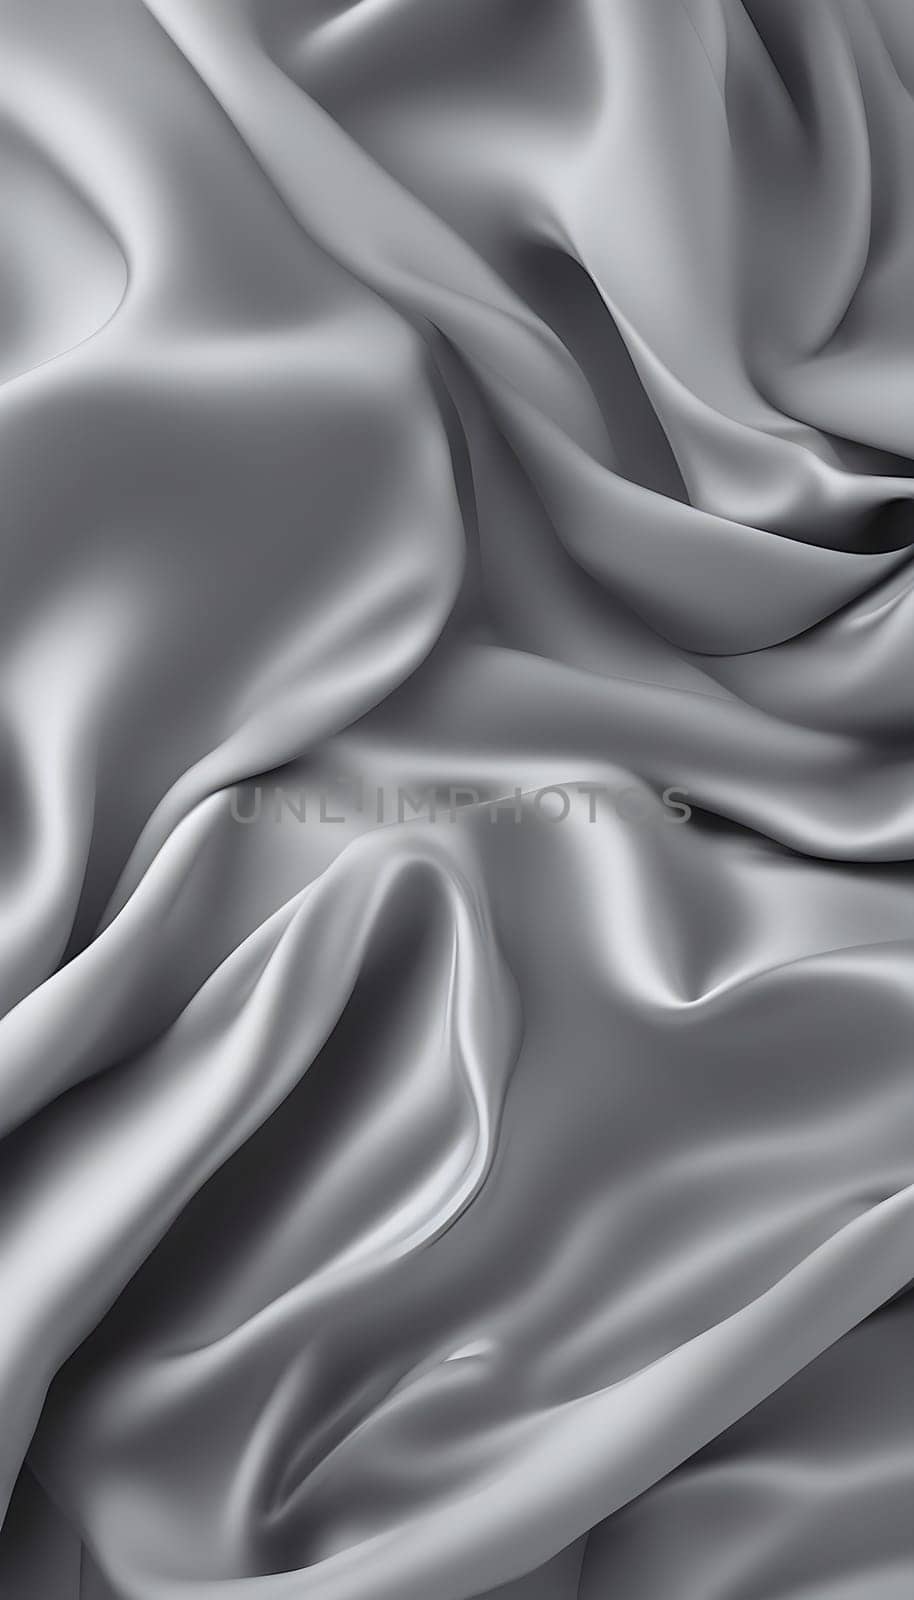 Technology background realistic color background folds of fabric or overlay for product or in shades of metallic light grey color by rostik924